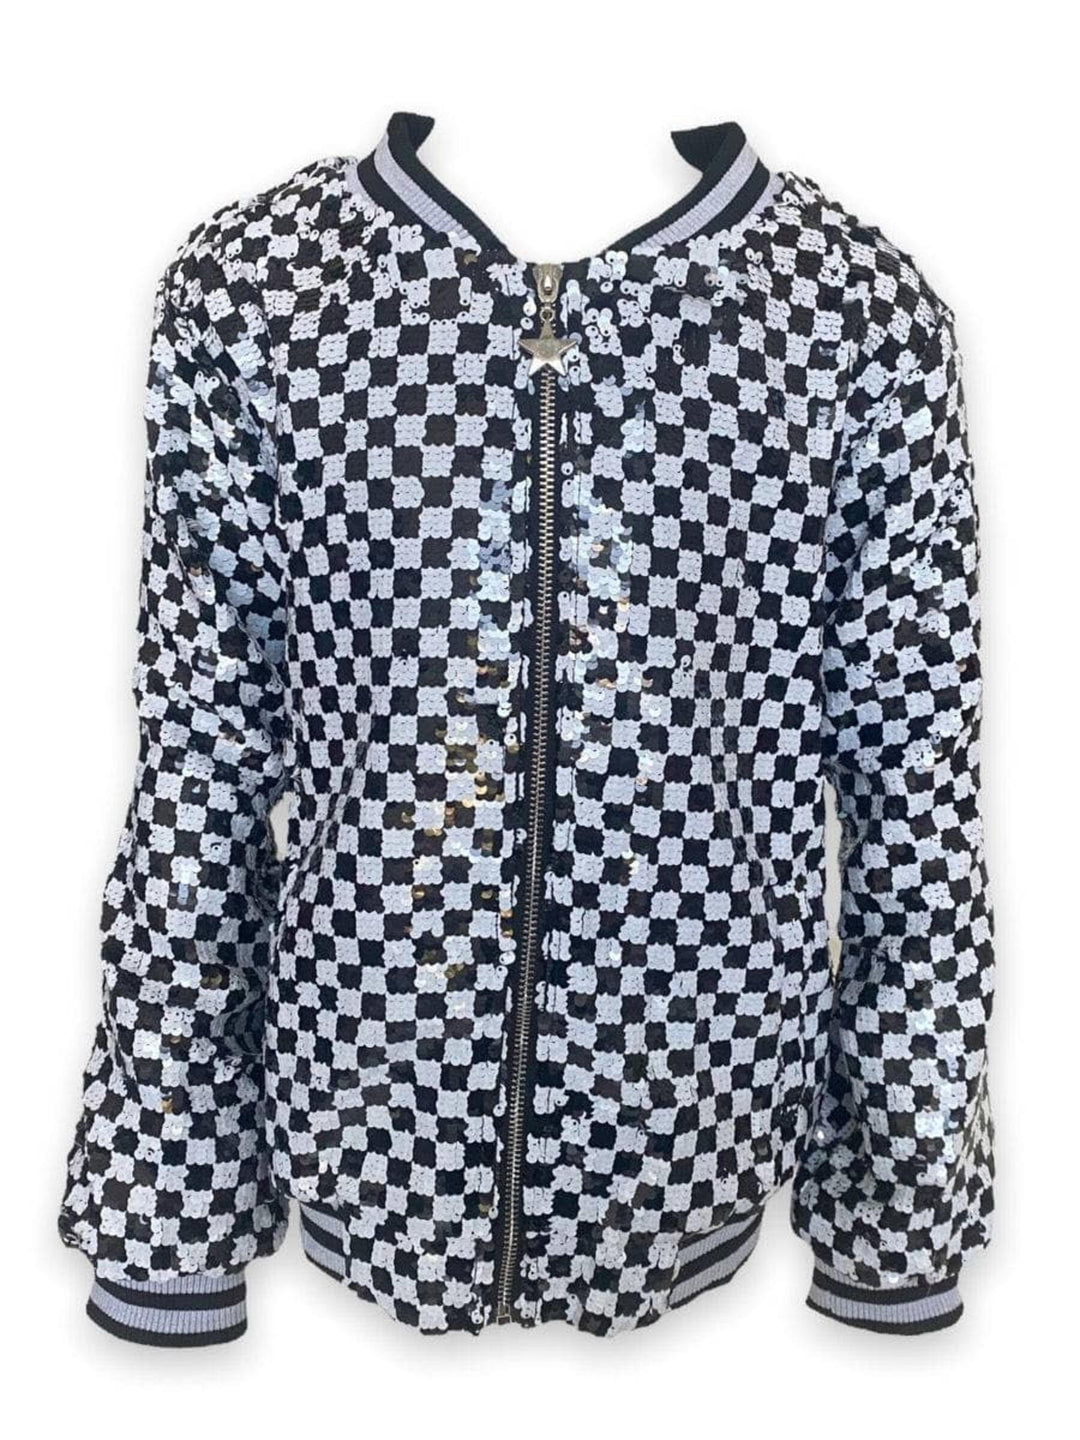 The Girls Skater Princess Checkered Jacket by Lola and the Boys